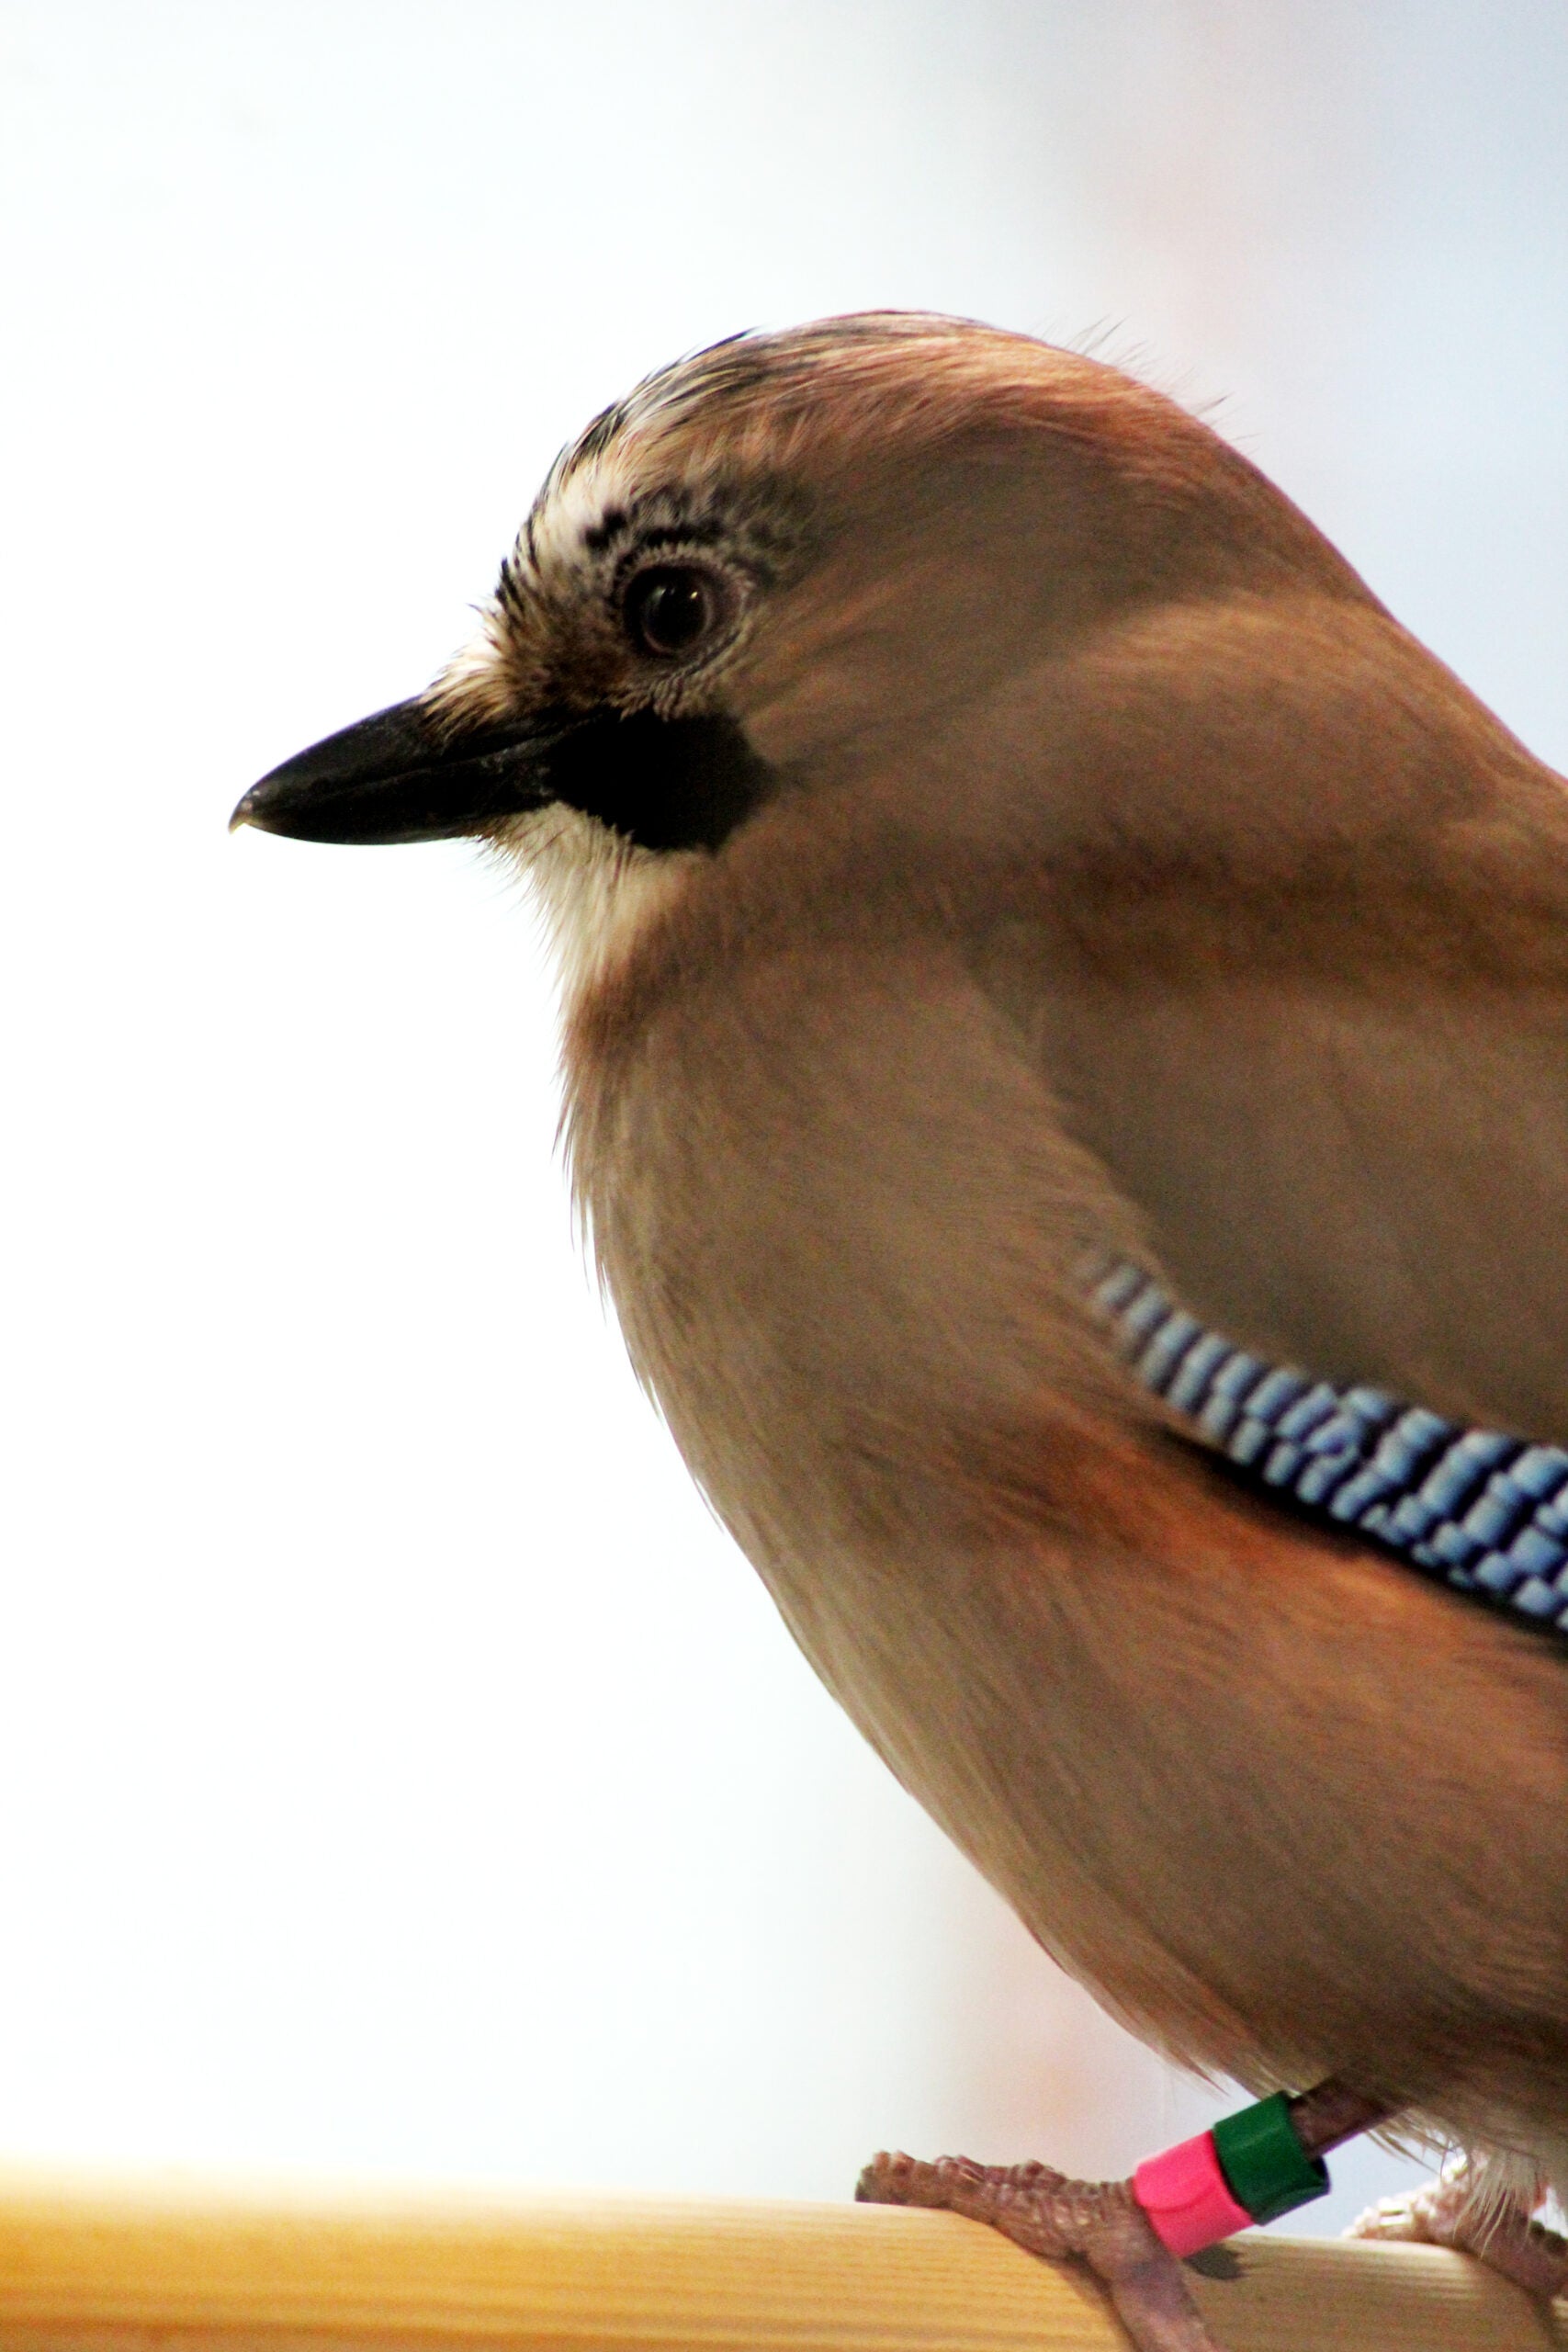 JayLo, a Eurasian jay who could ignore the bread and cheese for over five minutes.